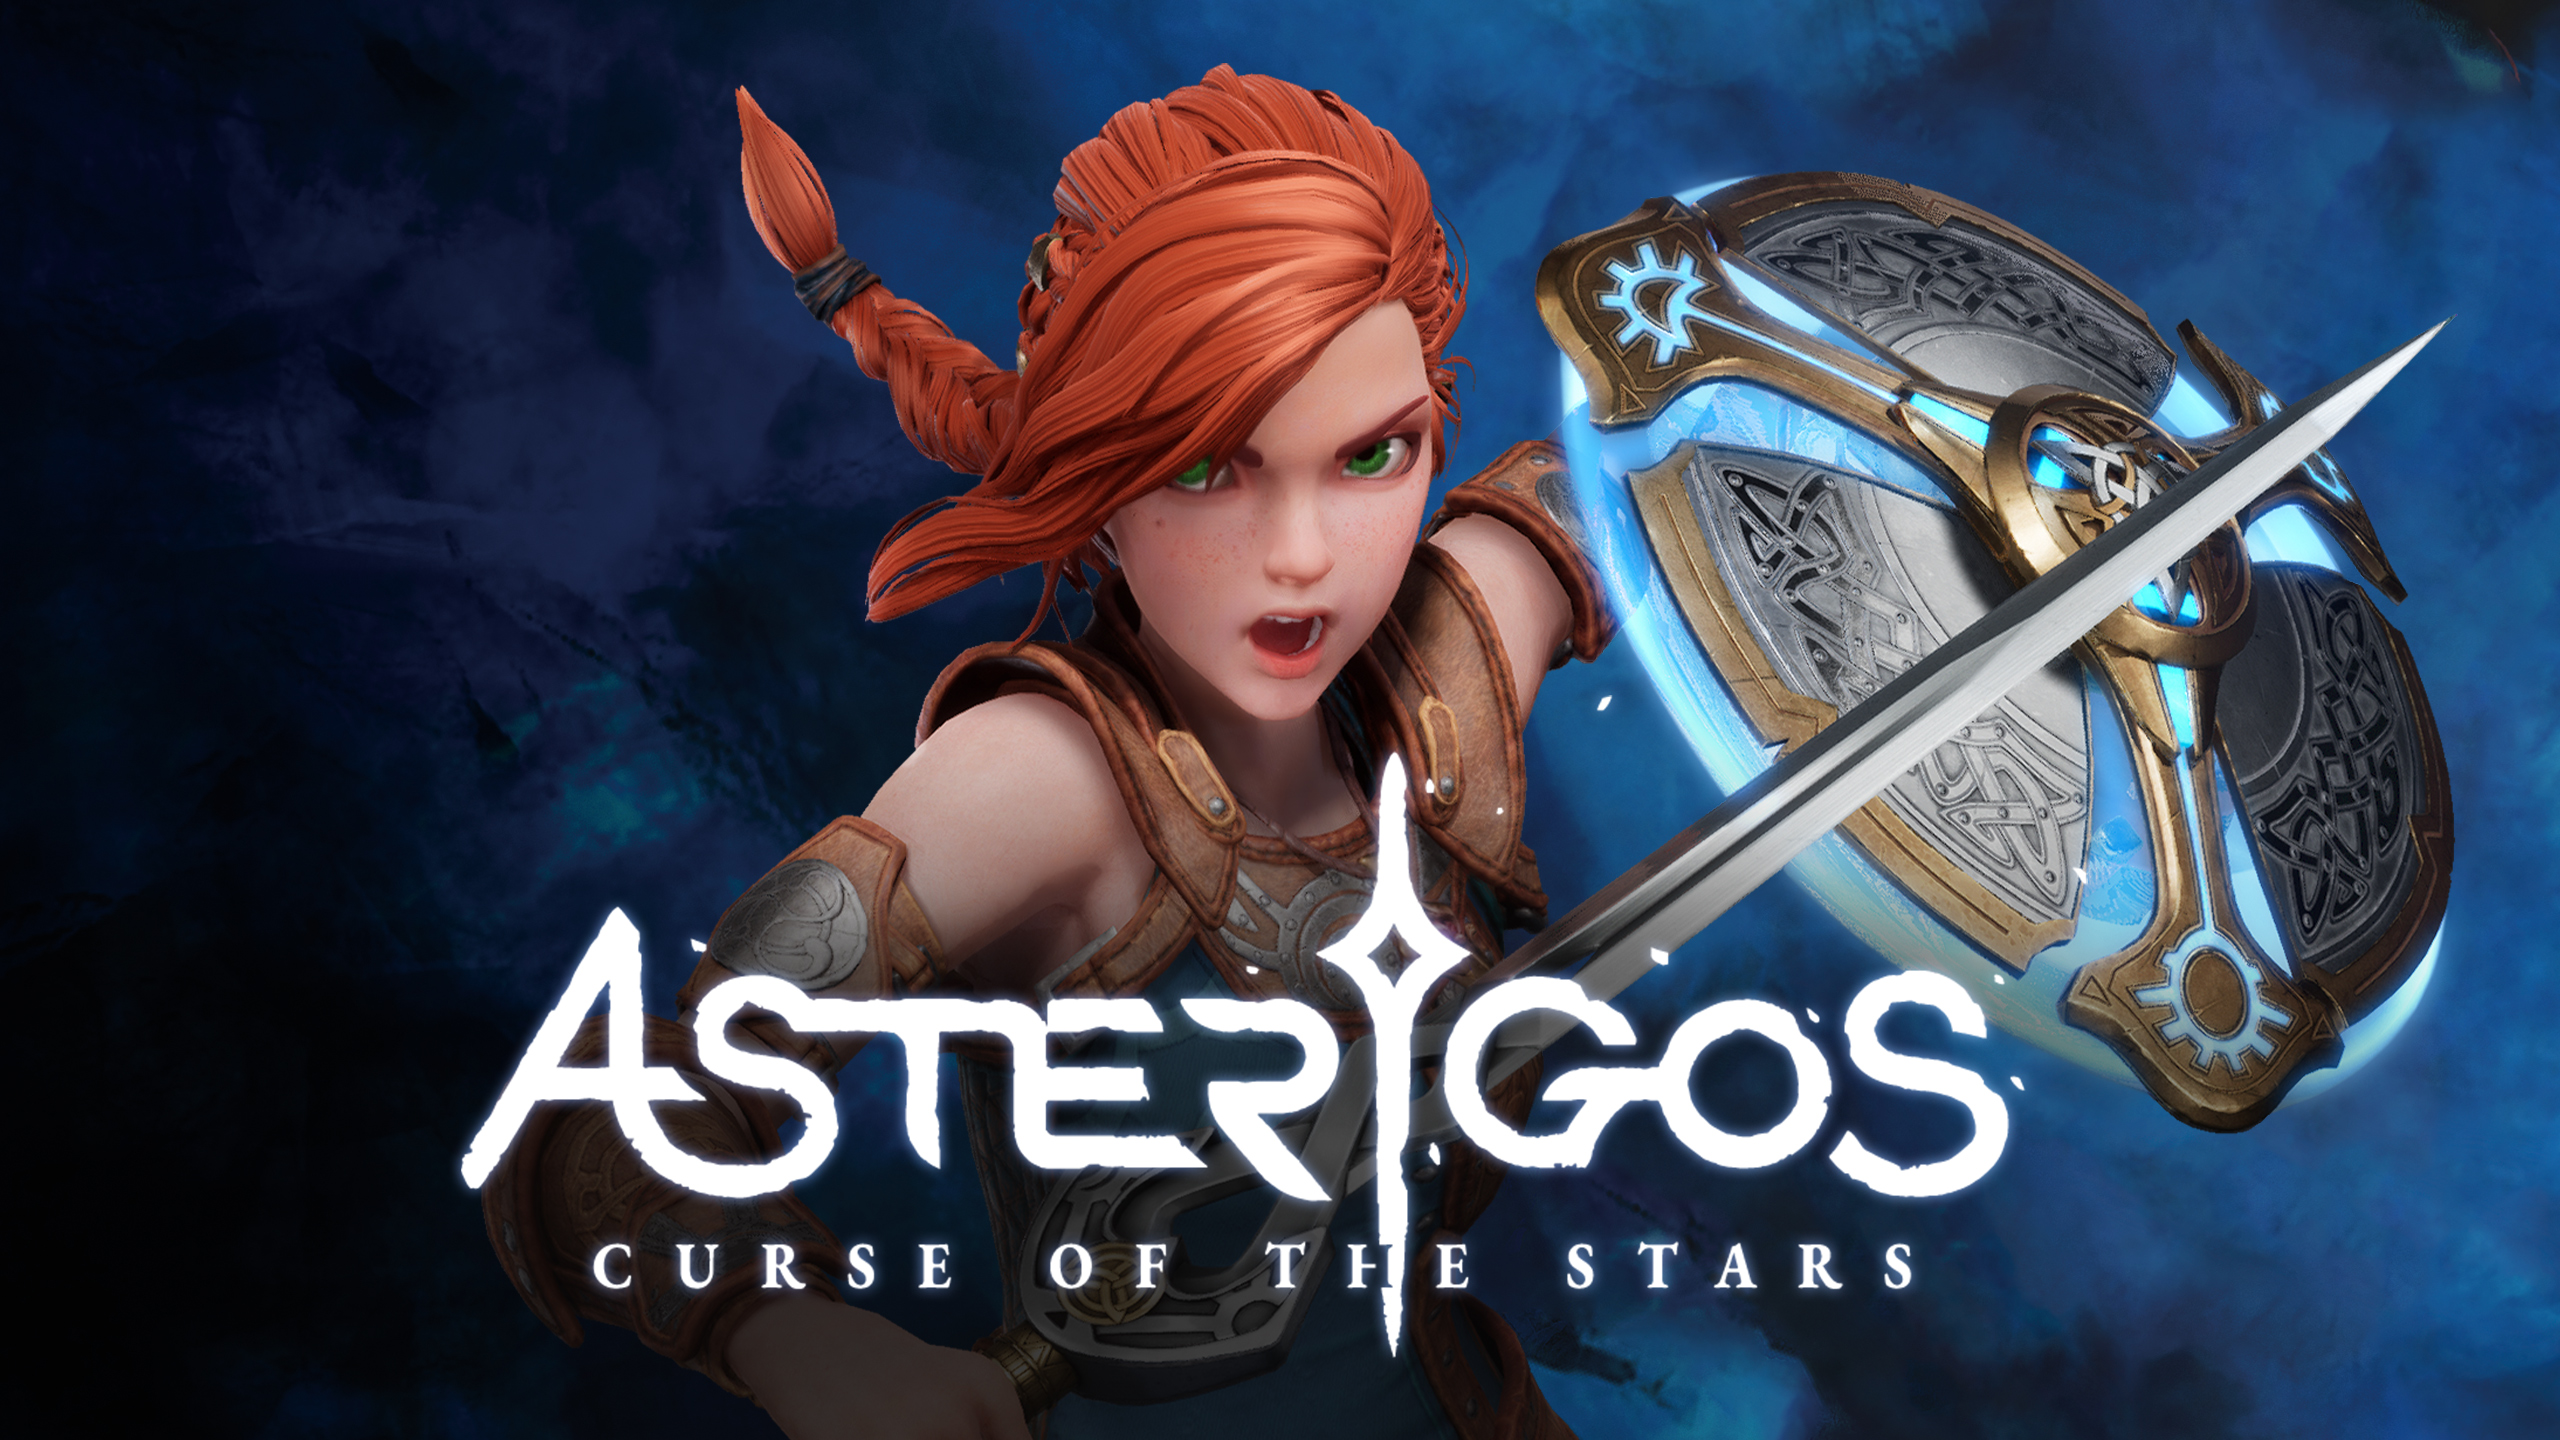 Curse of The Stars Overview – A Soulslite